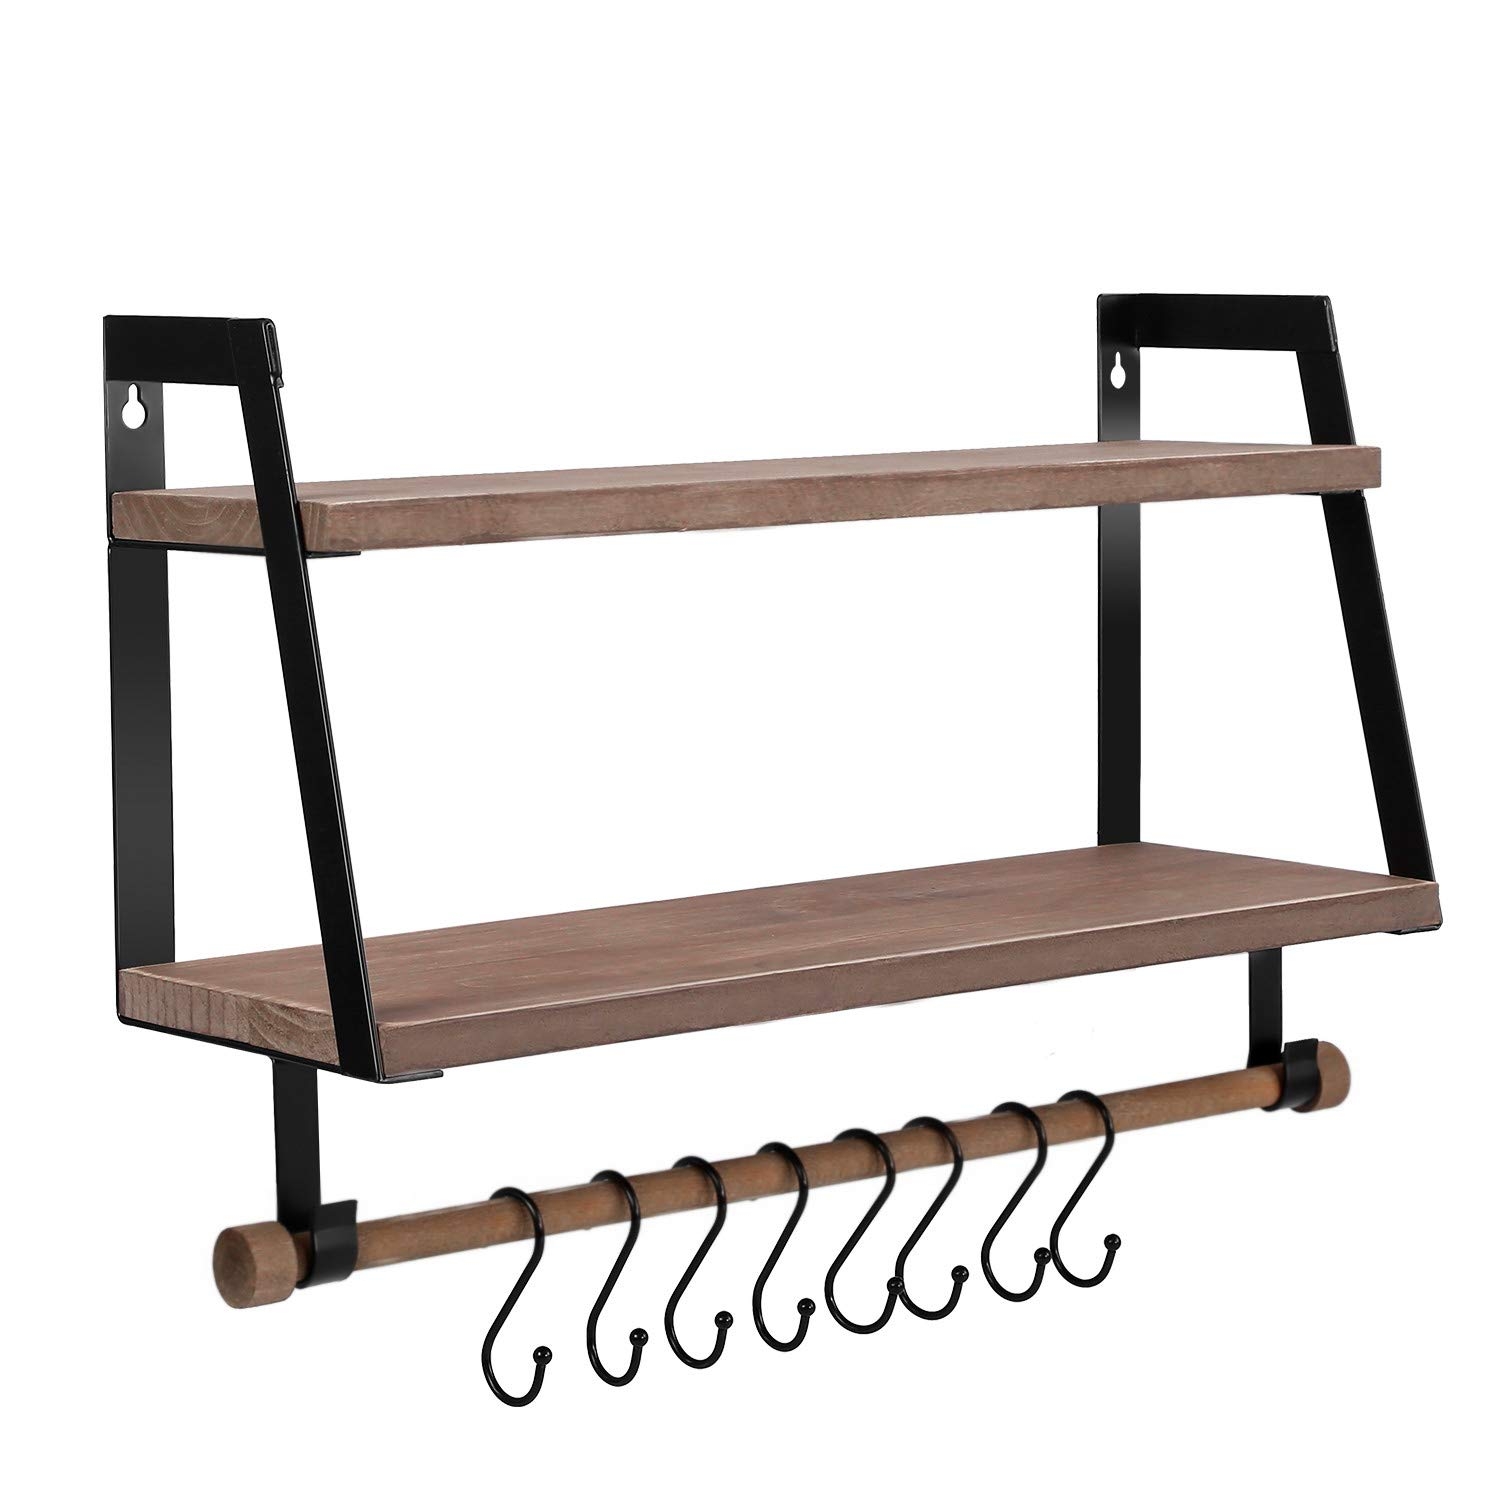 Large Enough to Fit Rolled Bath Towels in Black Solid Quality 3-Section 16 Inch Wall Mountable for Bathroom Storage Wallniture Wrought Iron Metal Towel Rack